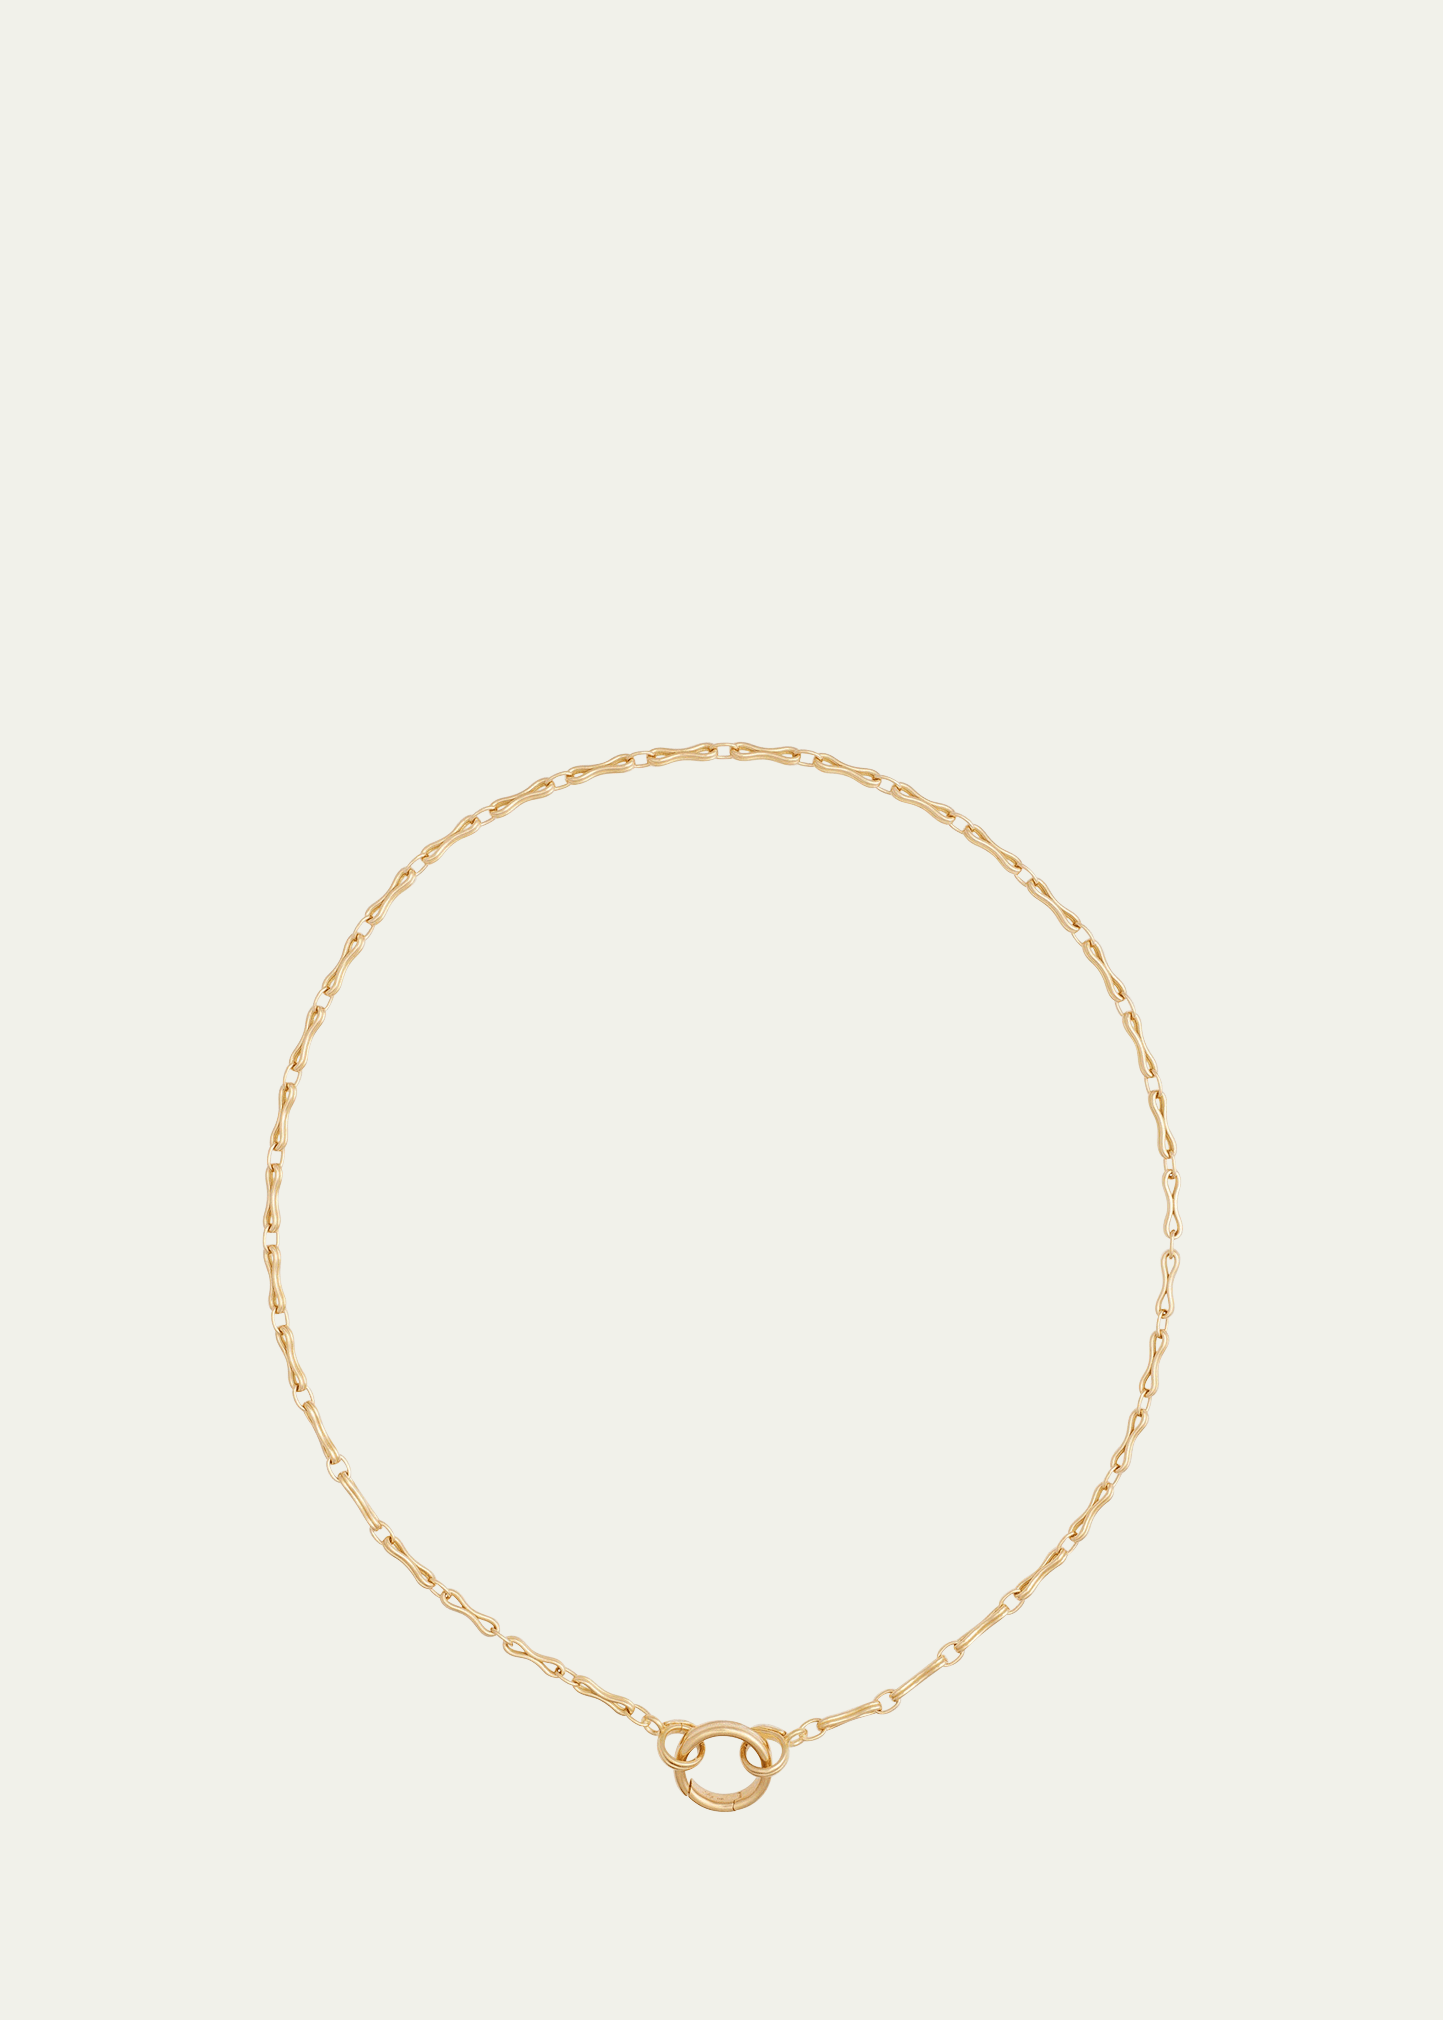 Sherman Field, 1967 18k Yellow Gold Convertible Column Chain Necklace With Medium Links, 20"l